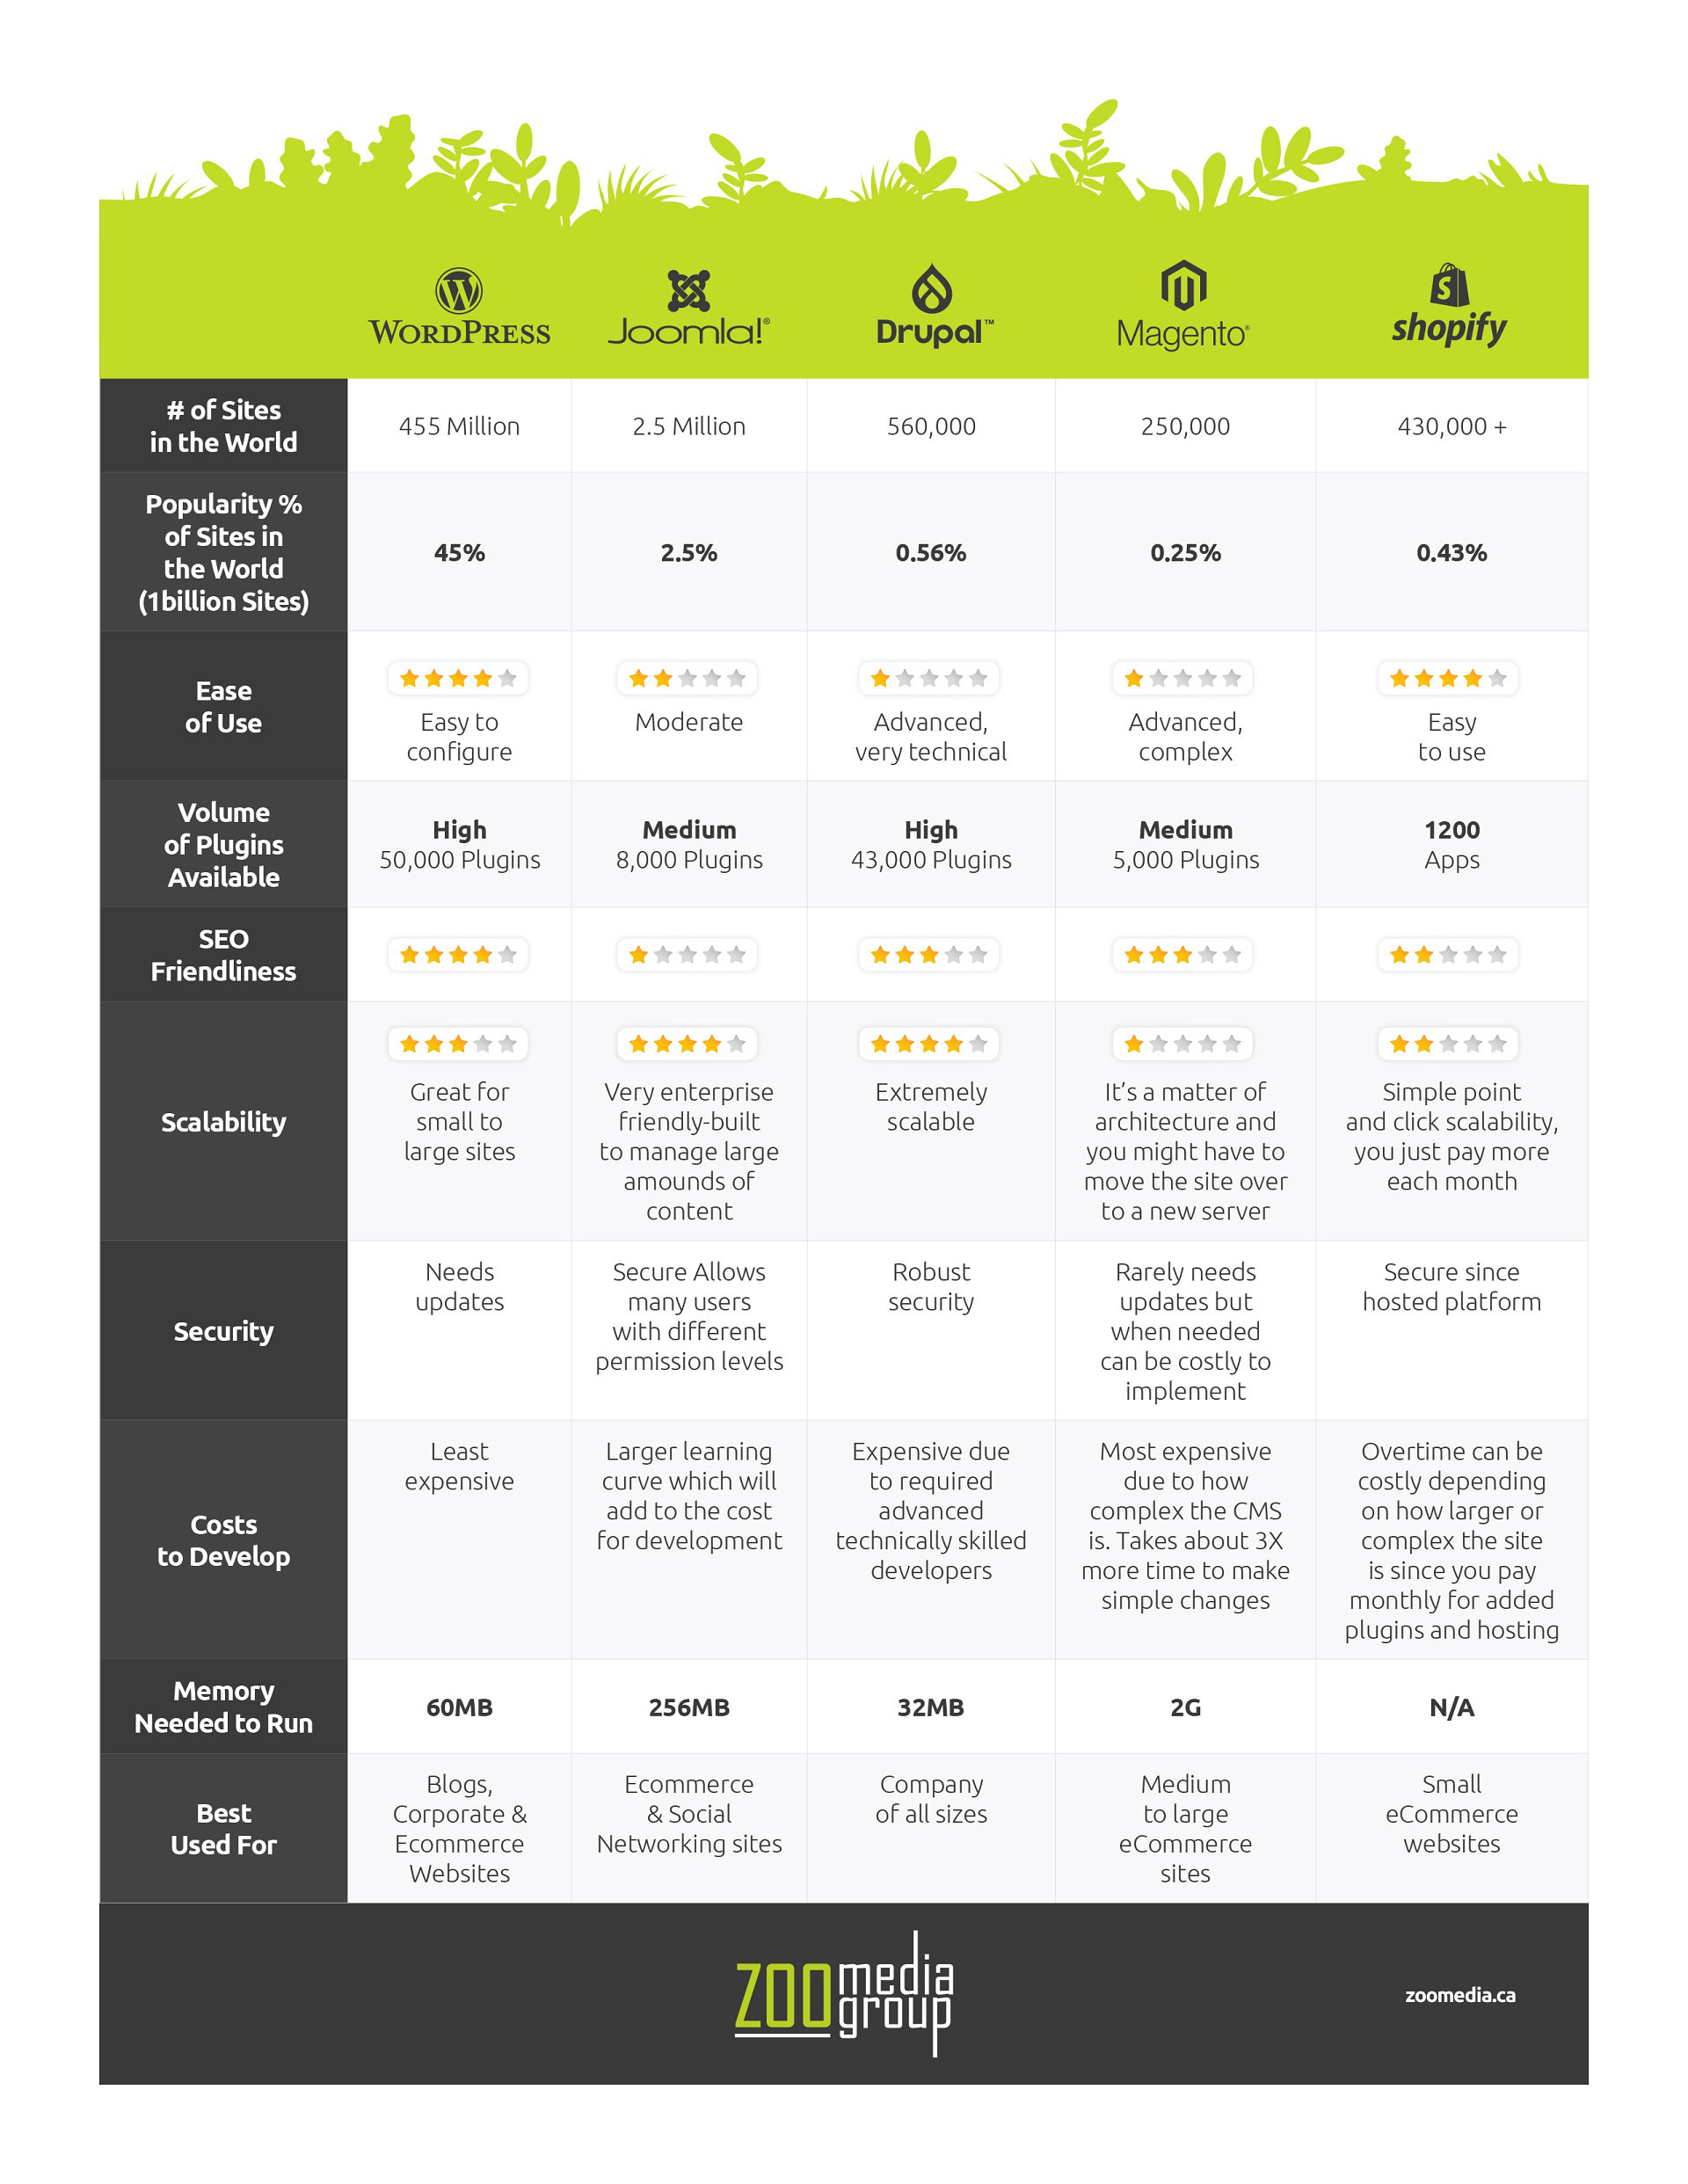 ZOO Media Group CMS Software Comparison Chart